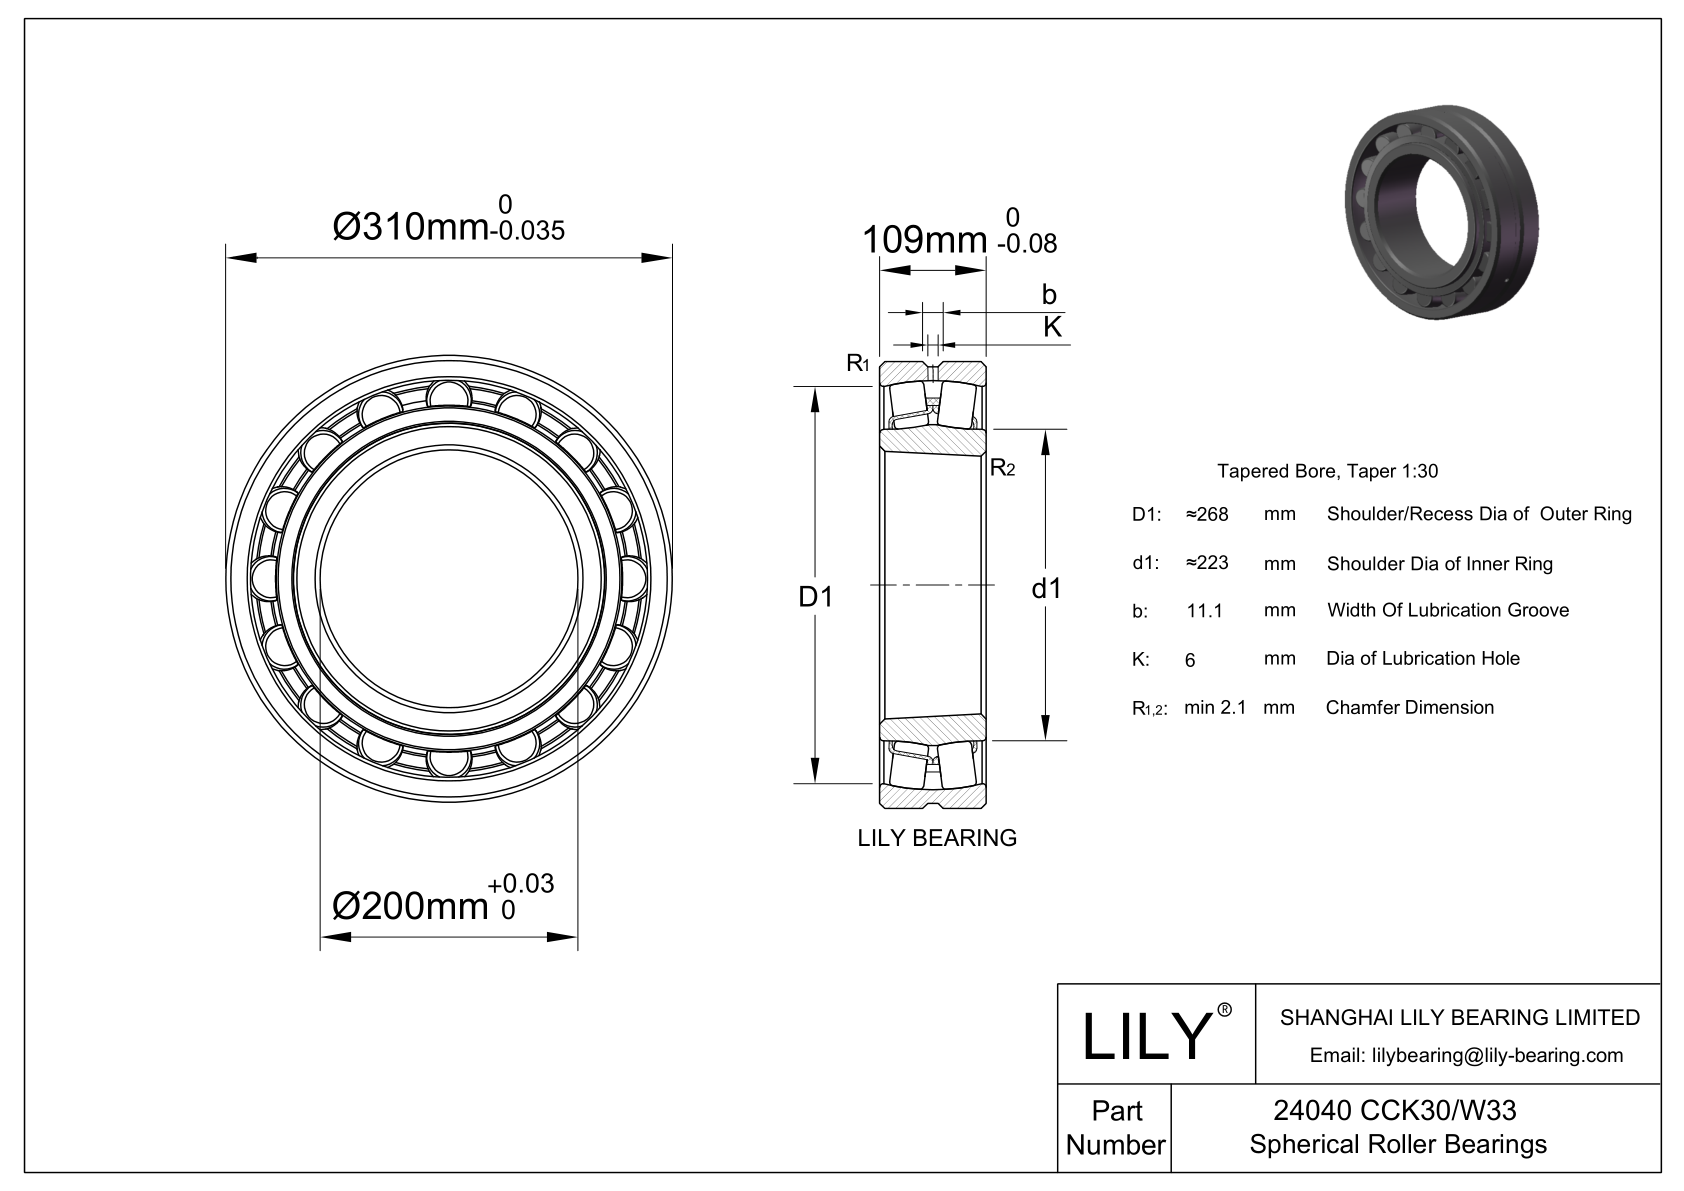 24040 CCK30/W33 Double Row Spherical Roller Bearing cad drawing